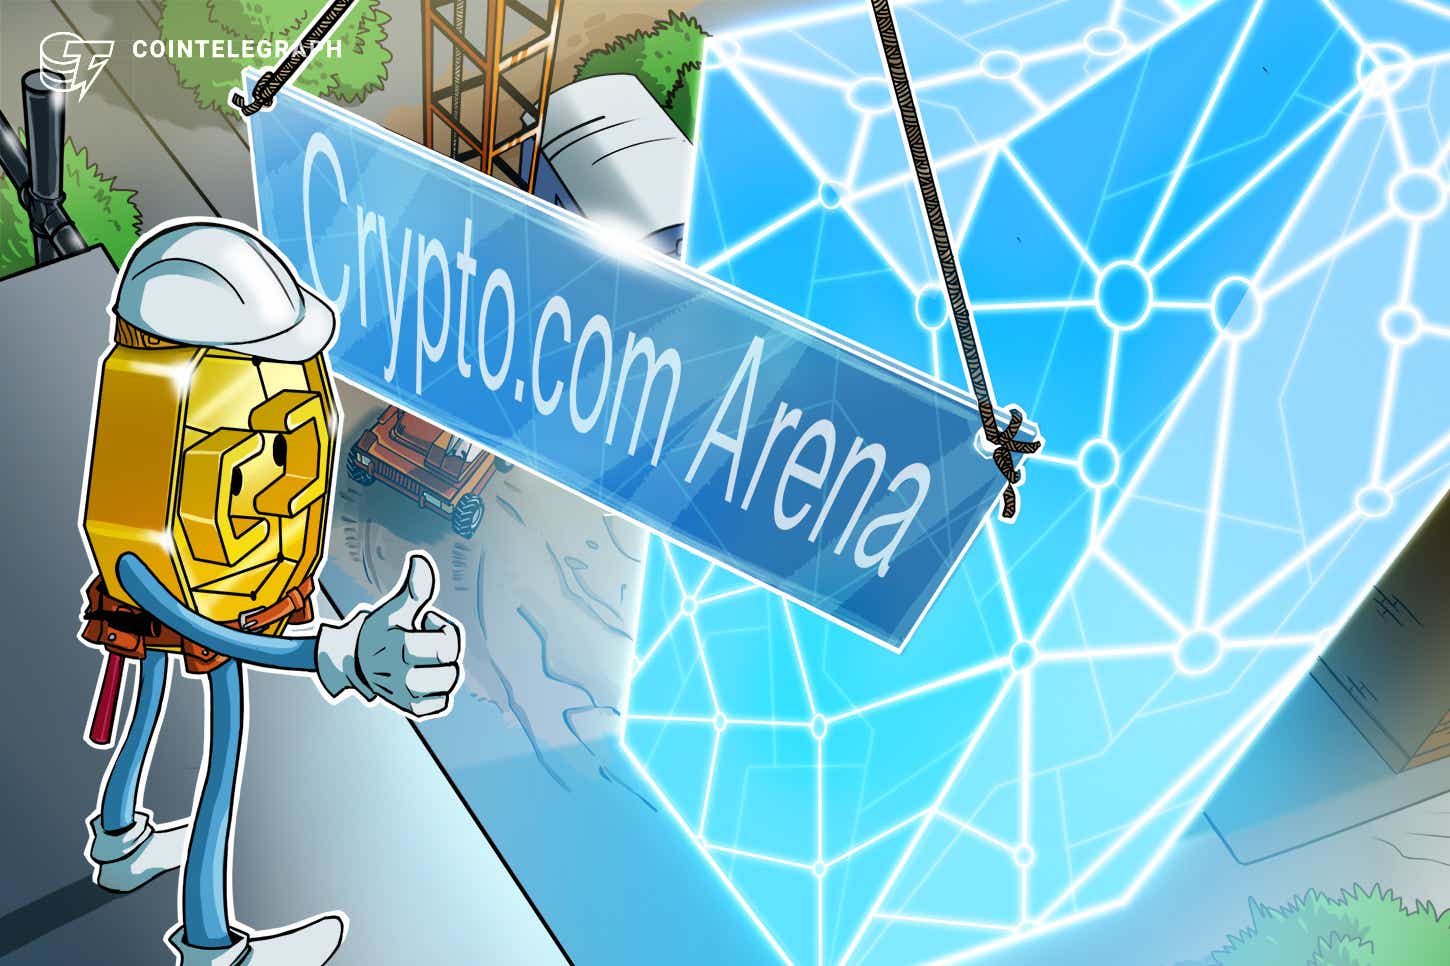 Staples Center Los Angeles will be renamed Crypto.com Arena